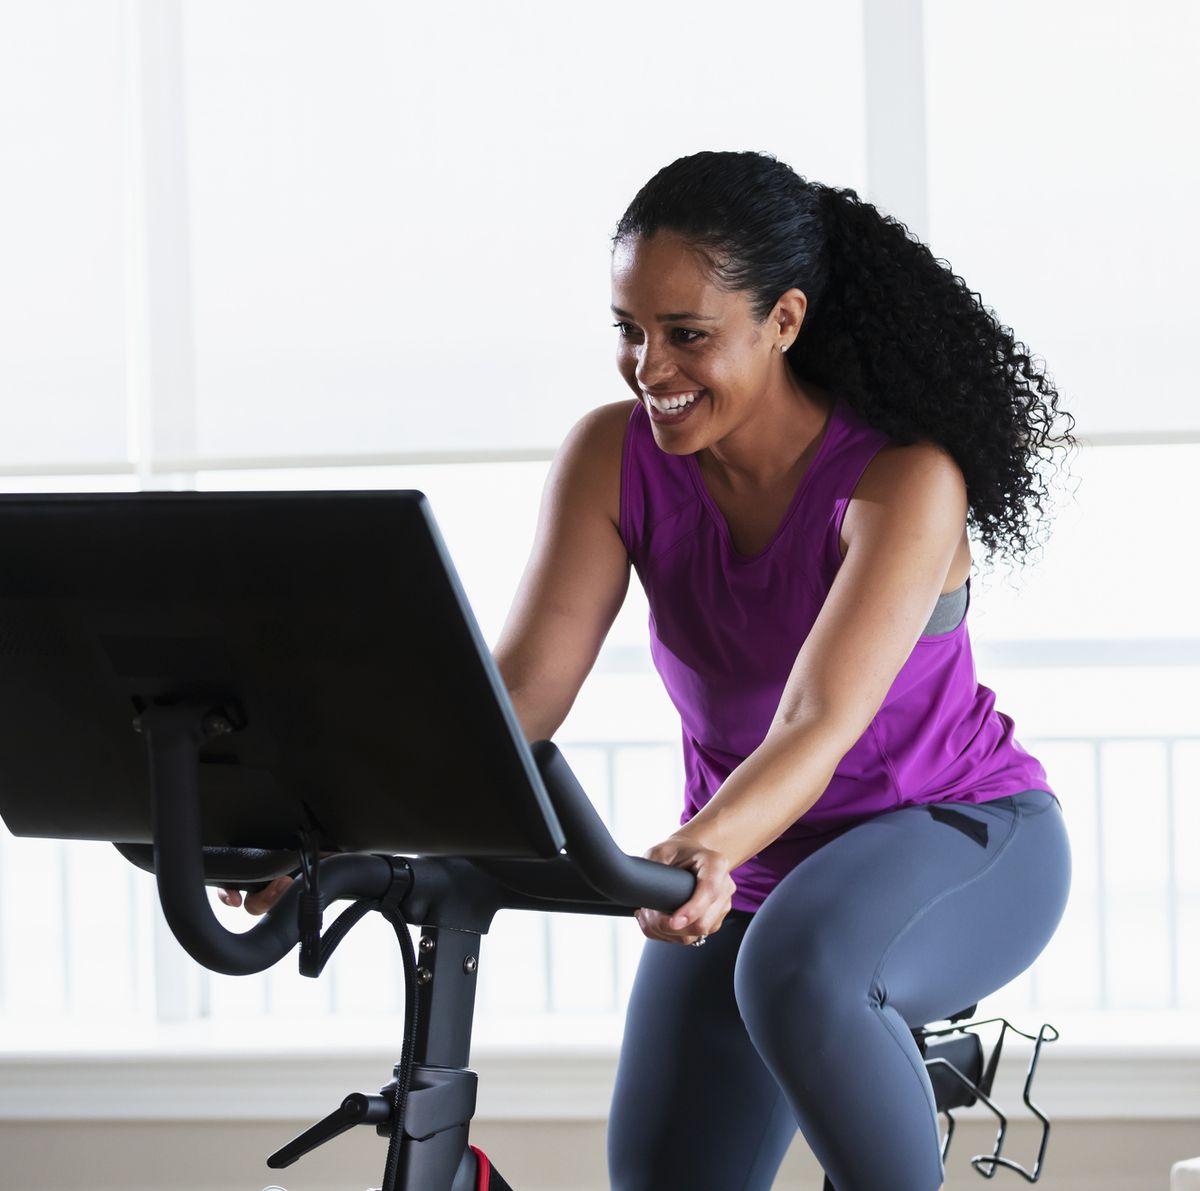 Low Impact Cardio Exercises: 6 Workouts To Try At Home